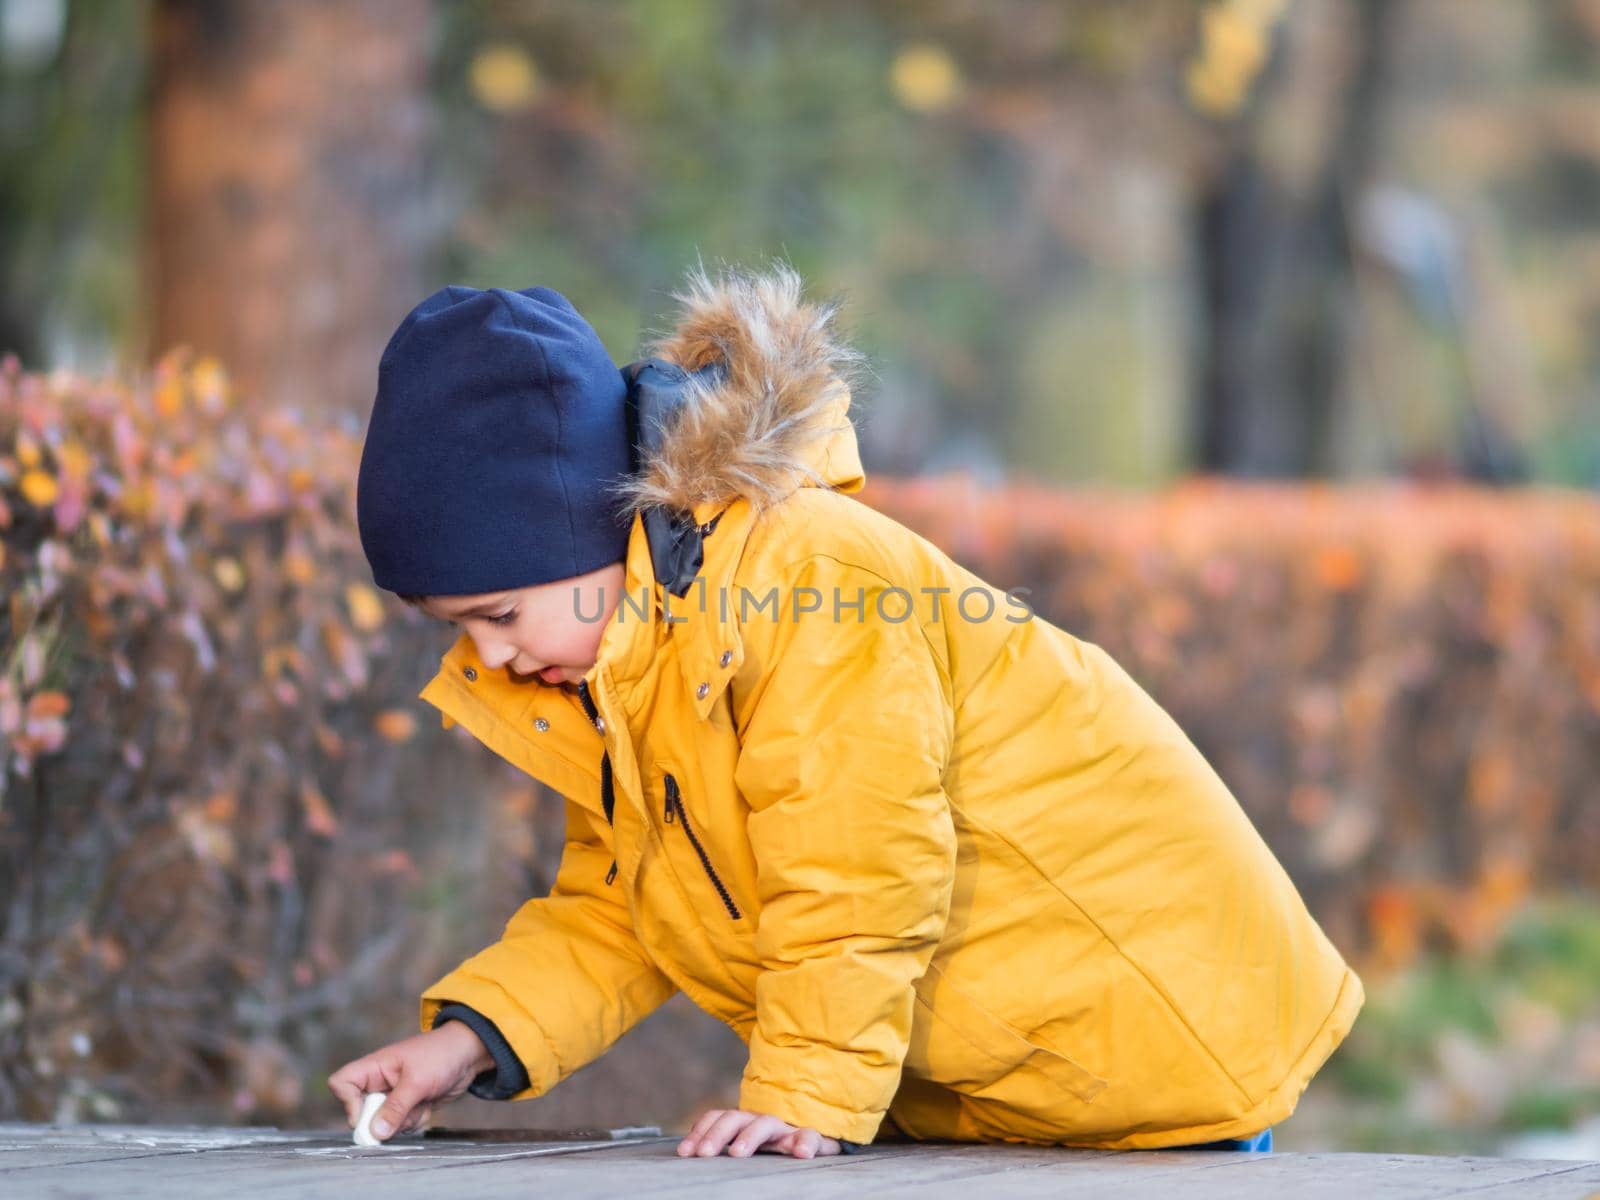 Little boy writes or draws something with chalk on pavement. Creative leisure activity outdoors at fall.